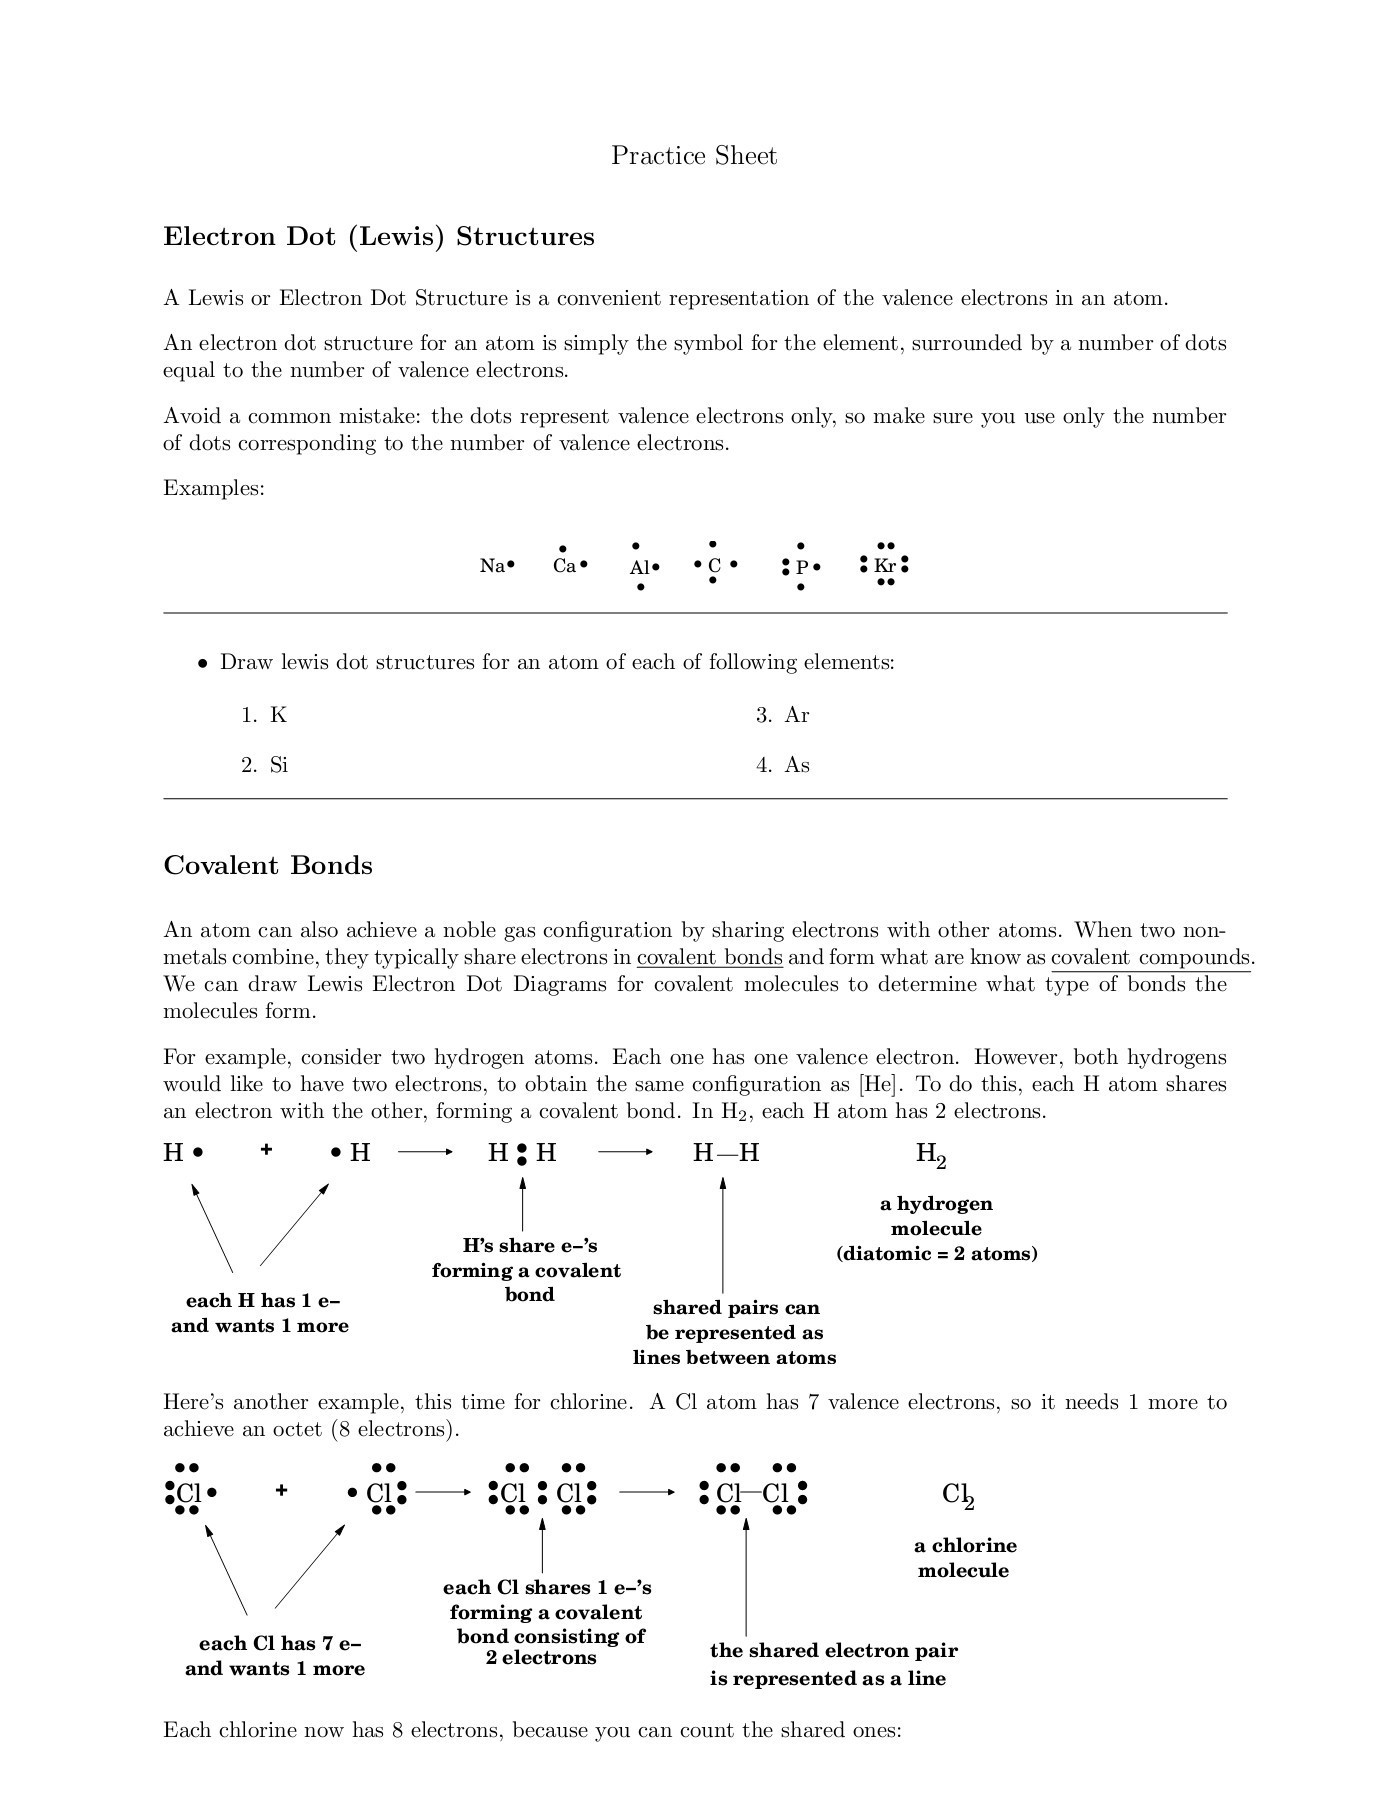 Valence Electrons Worksheet Answers Electron Dot Lewis Structures Pages 1 4 Text Version